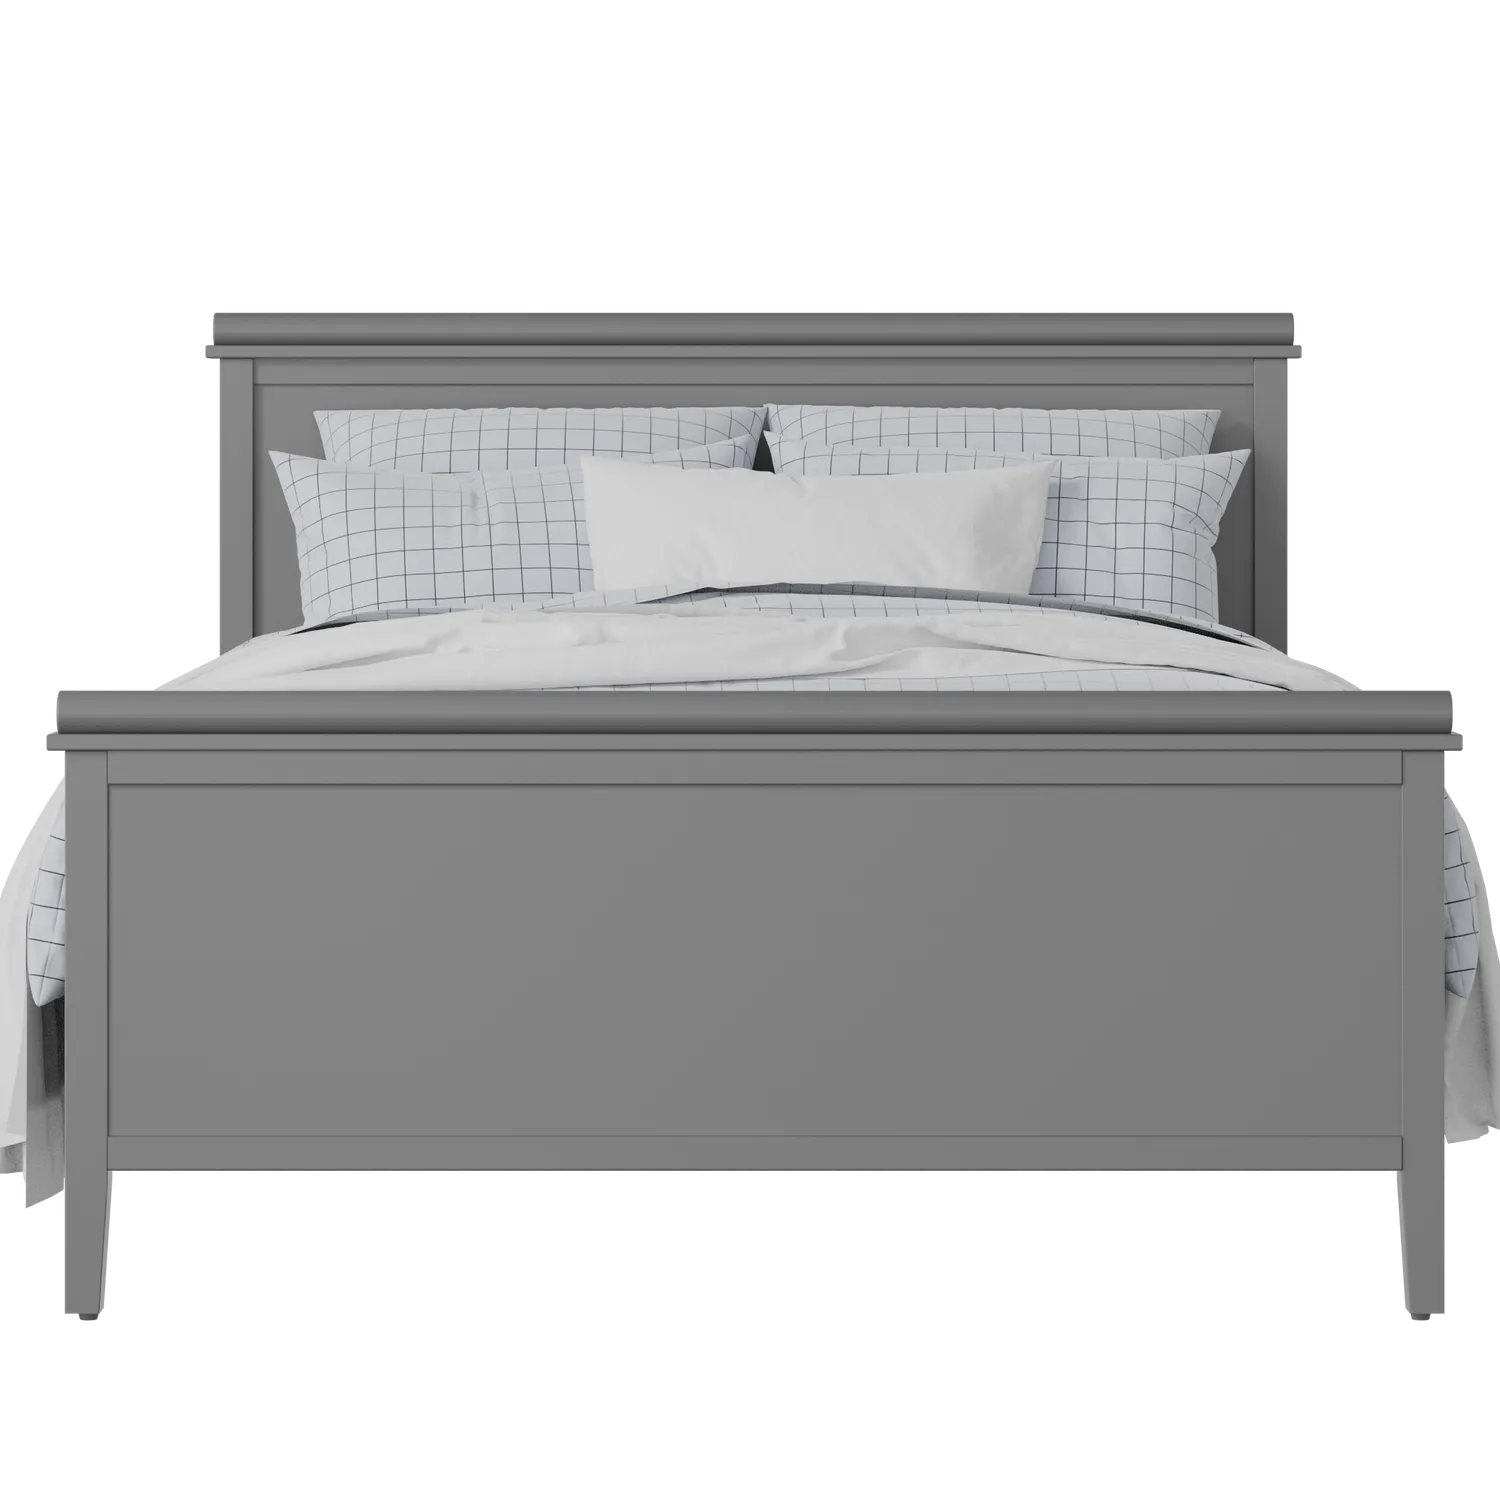 Nocturne Painted painted wood bed in grey with Juno mattress